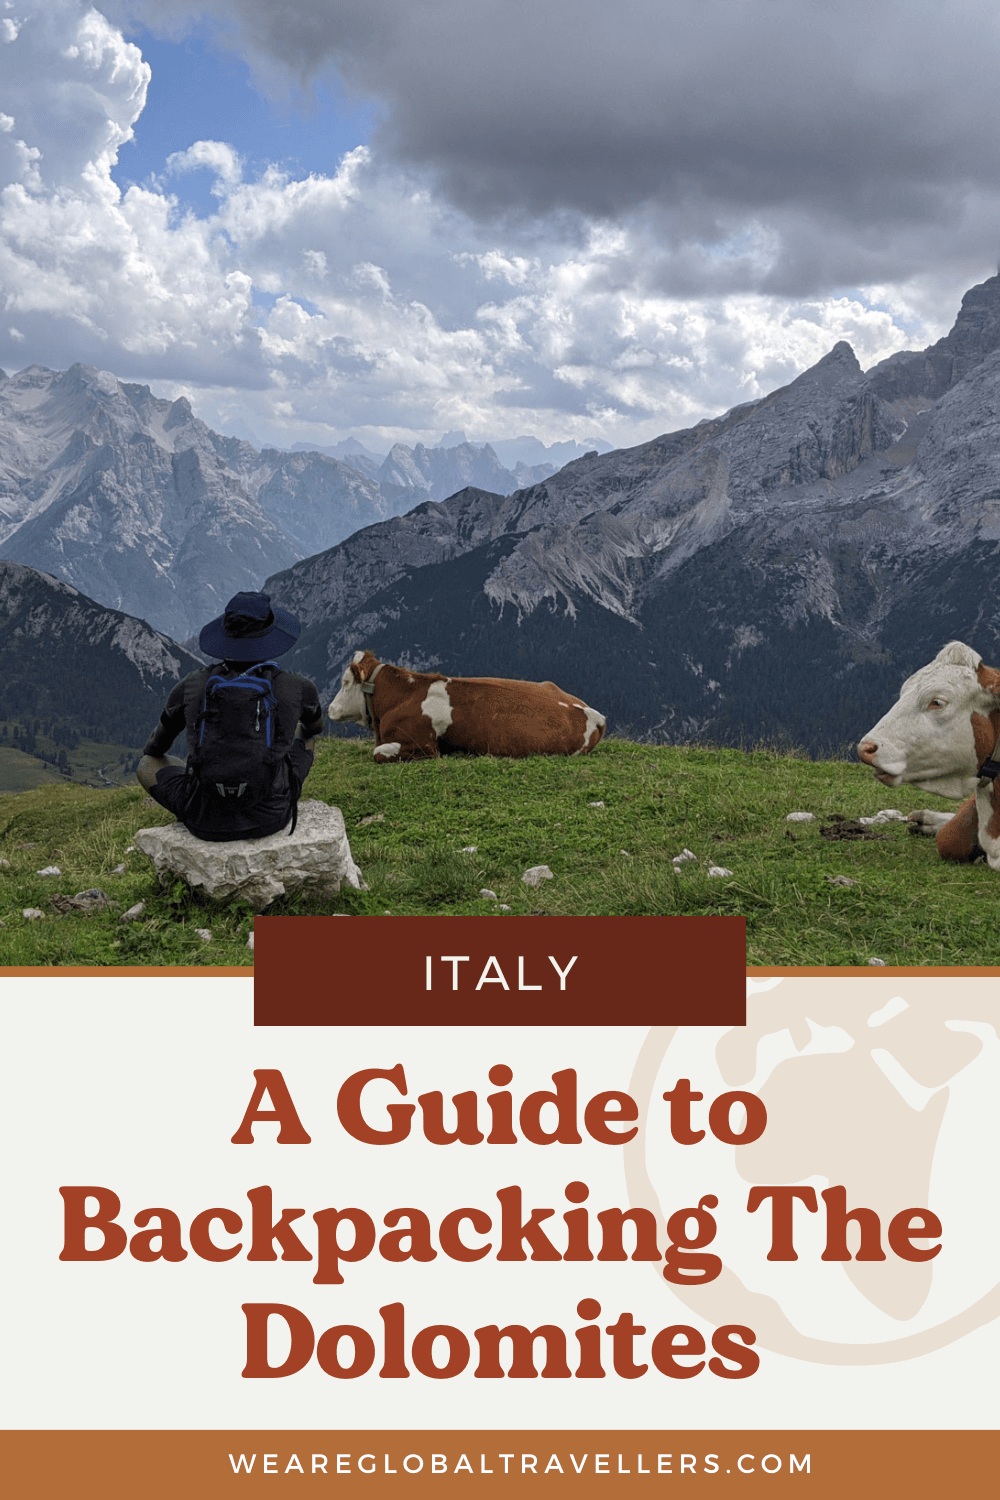 A Guide to Backpacking in The Dolomites